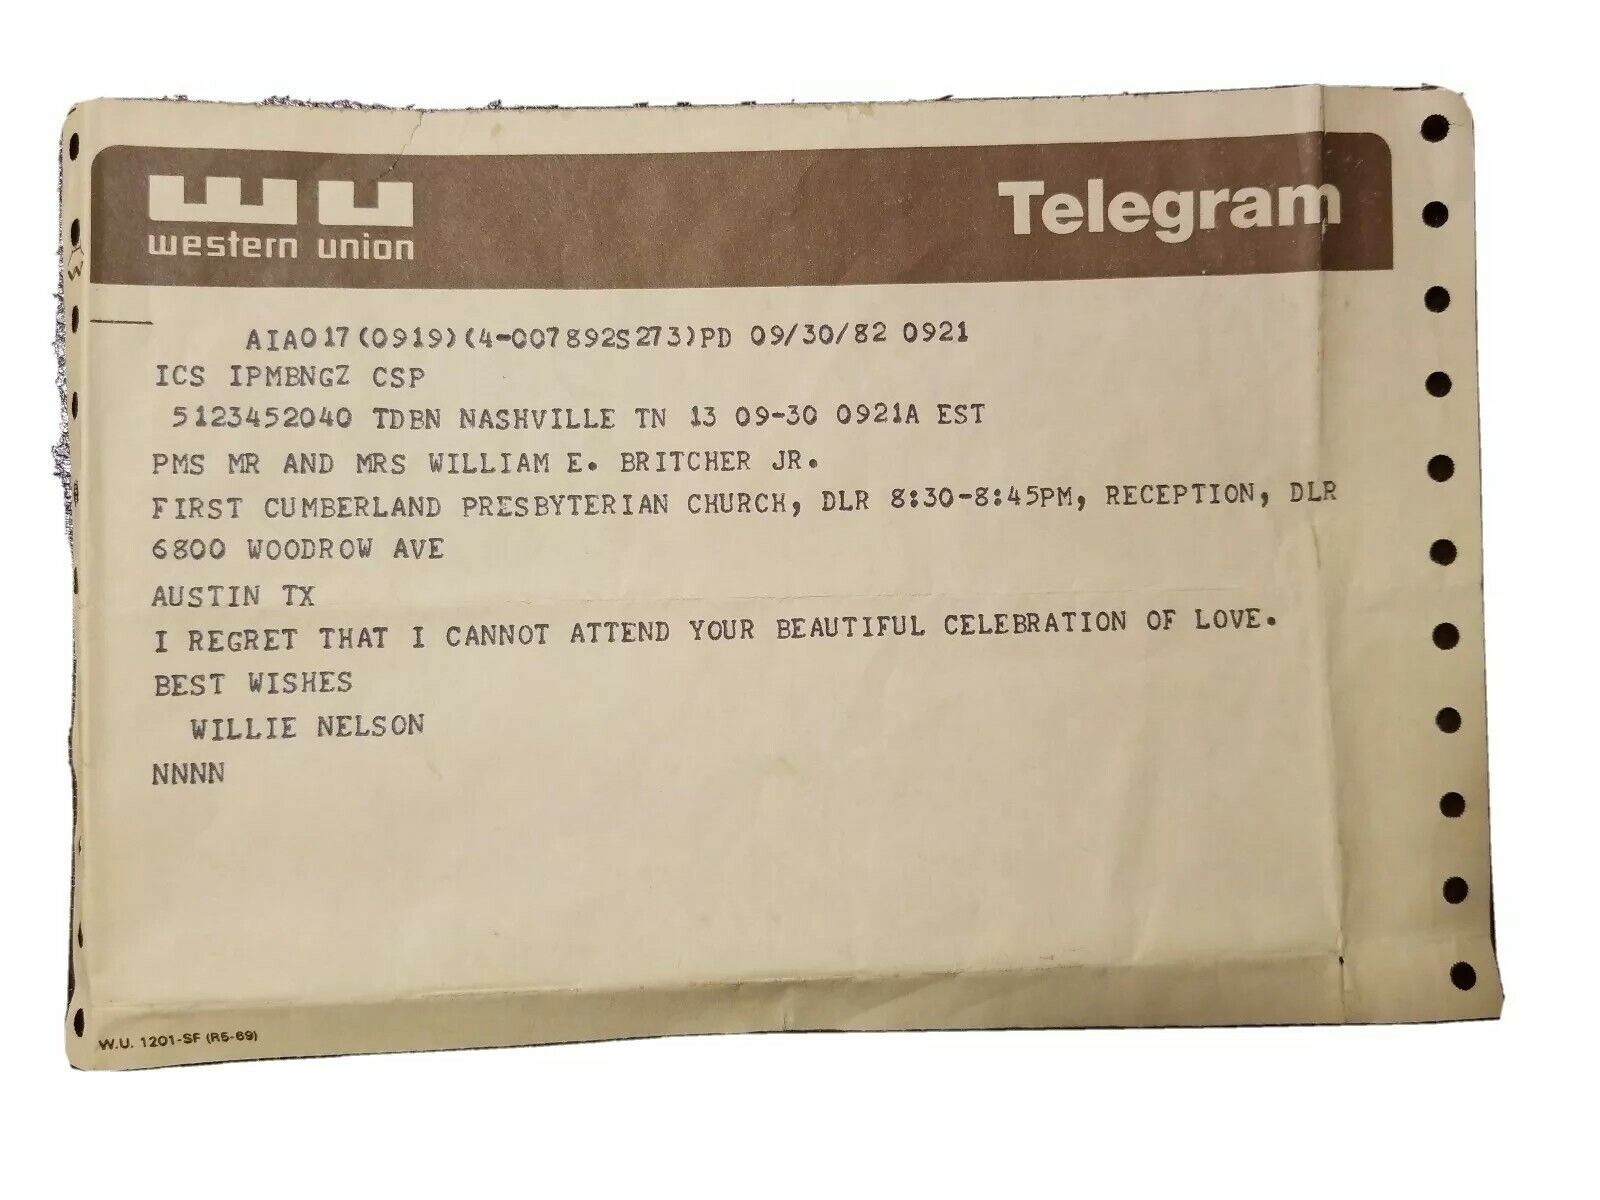 Rare 1982 Western Union Telegram from Willie Nelson - Personal and Authentic Mem